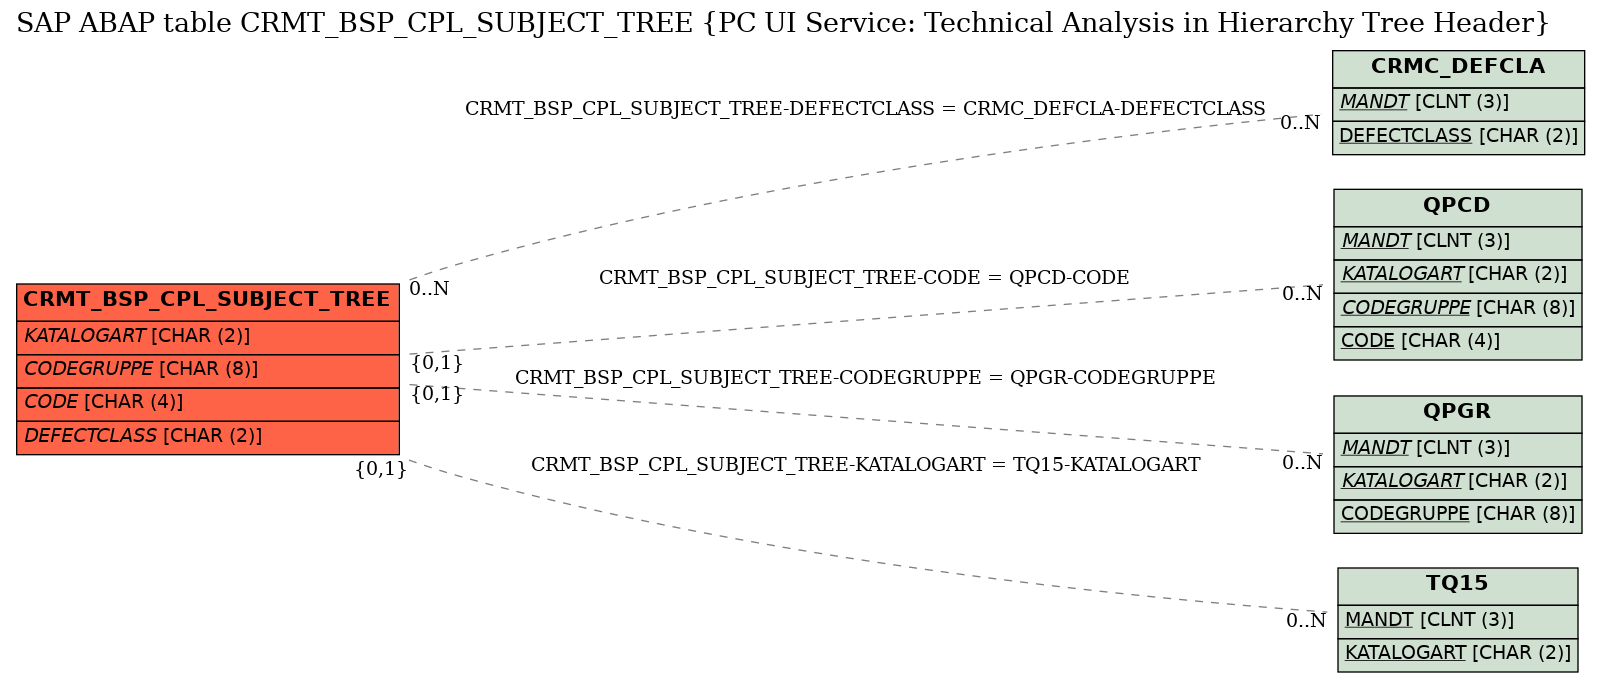 E-R Diagram for table CRMT_BSP_CPL_SUBJECT_TREE (PC UI Service: Technical Analysis in Hierarchy Tree Header)